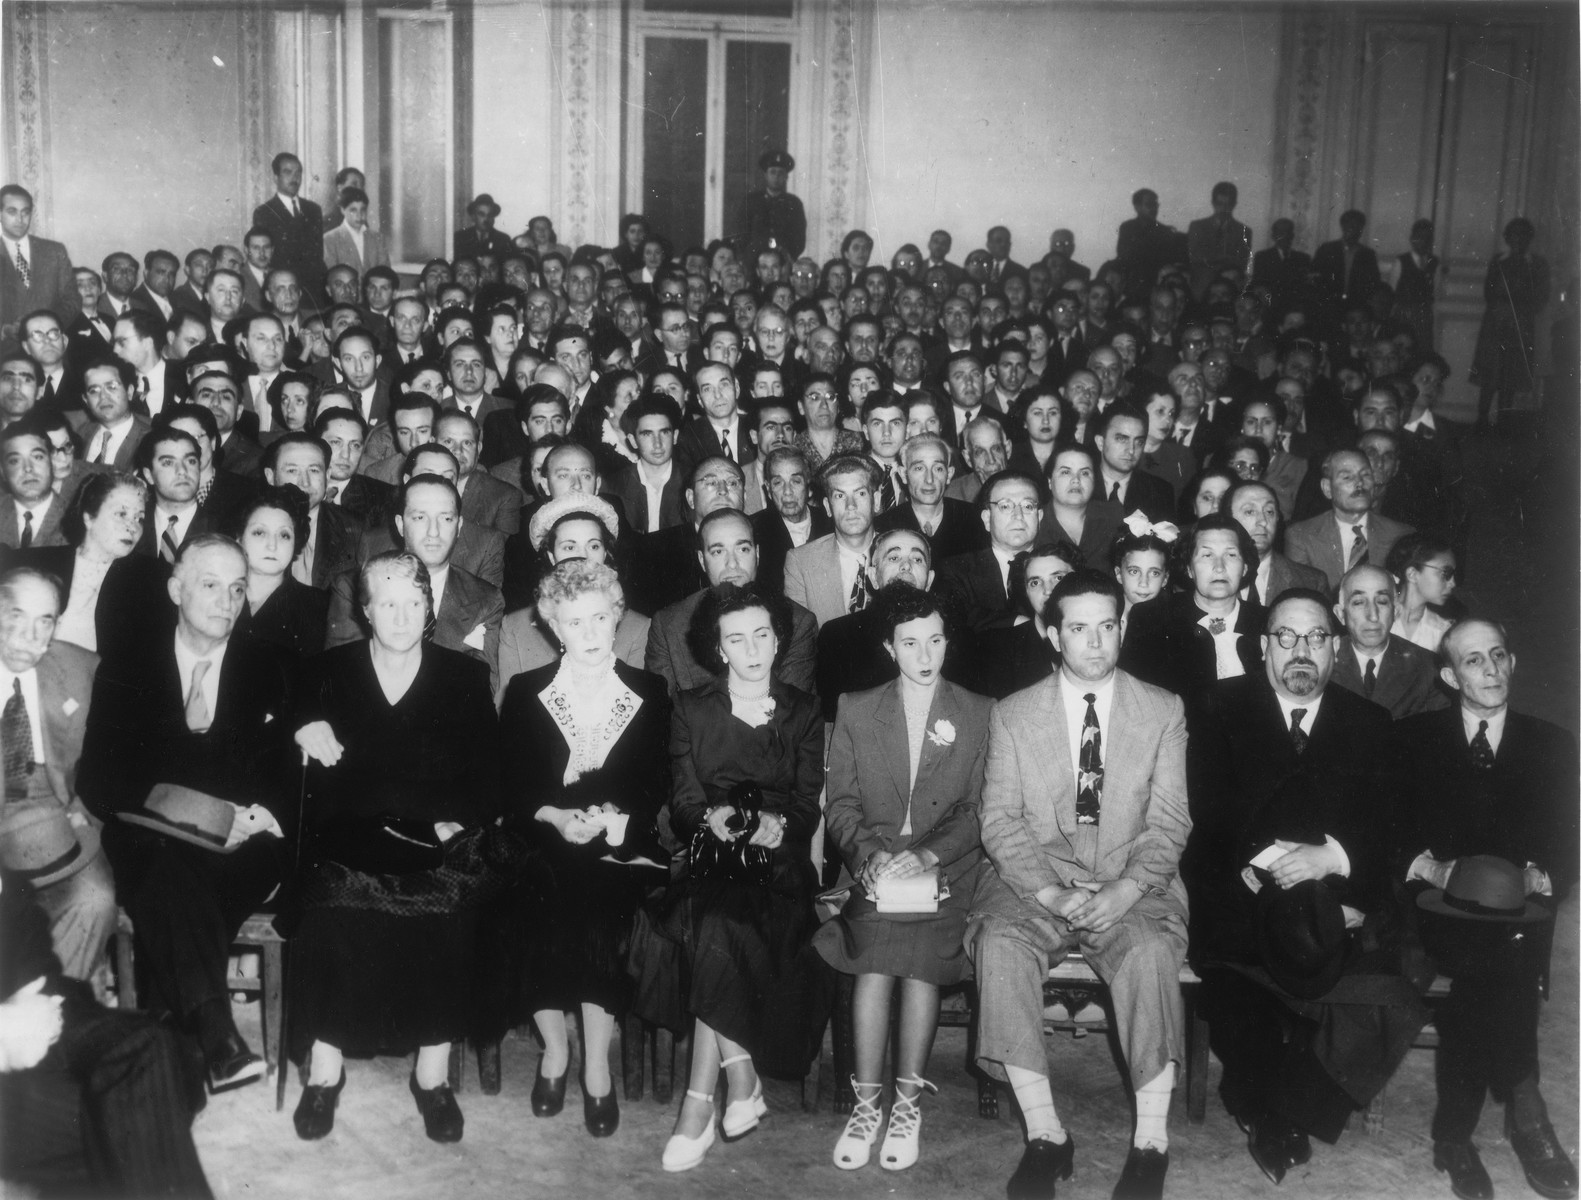 A large crowd assembles in the Parnassos lecture hall in Athens to celebrate the founding of Israel.  

Rabbi Elias Barzilai is seated in the front row, second from the right.  Jack Amar is seated on the far right.  Also pictured are Noah Yeshouroun, Sylvia Levy, Freddy Barouh, Rosetta Vital, Noulis Vital, Elias Leon, Markos Tabach, Michael Matsas, Pepo Benouziglio, Lydia Shabetay, and Kaimis.